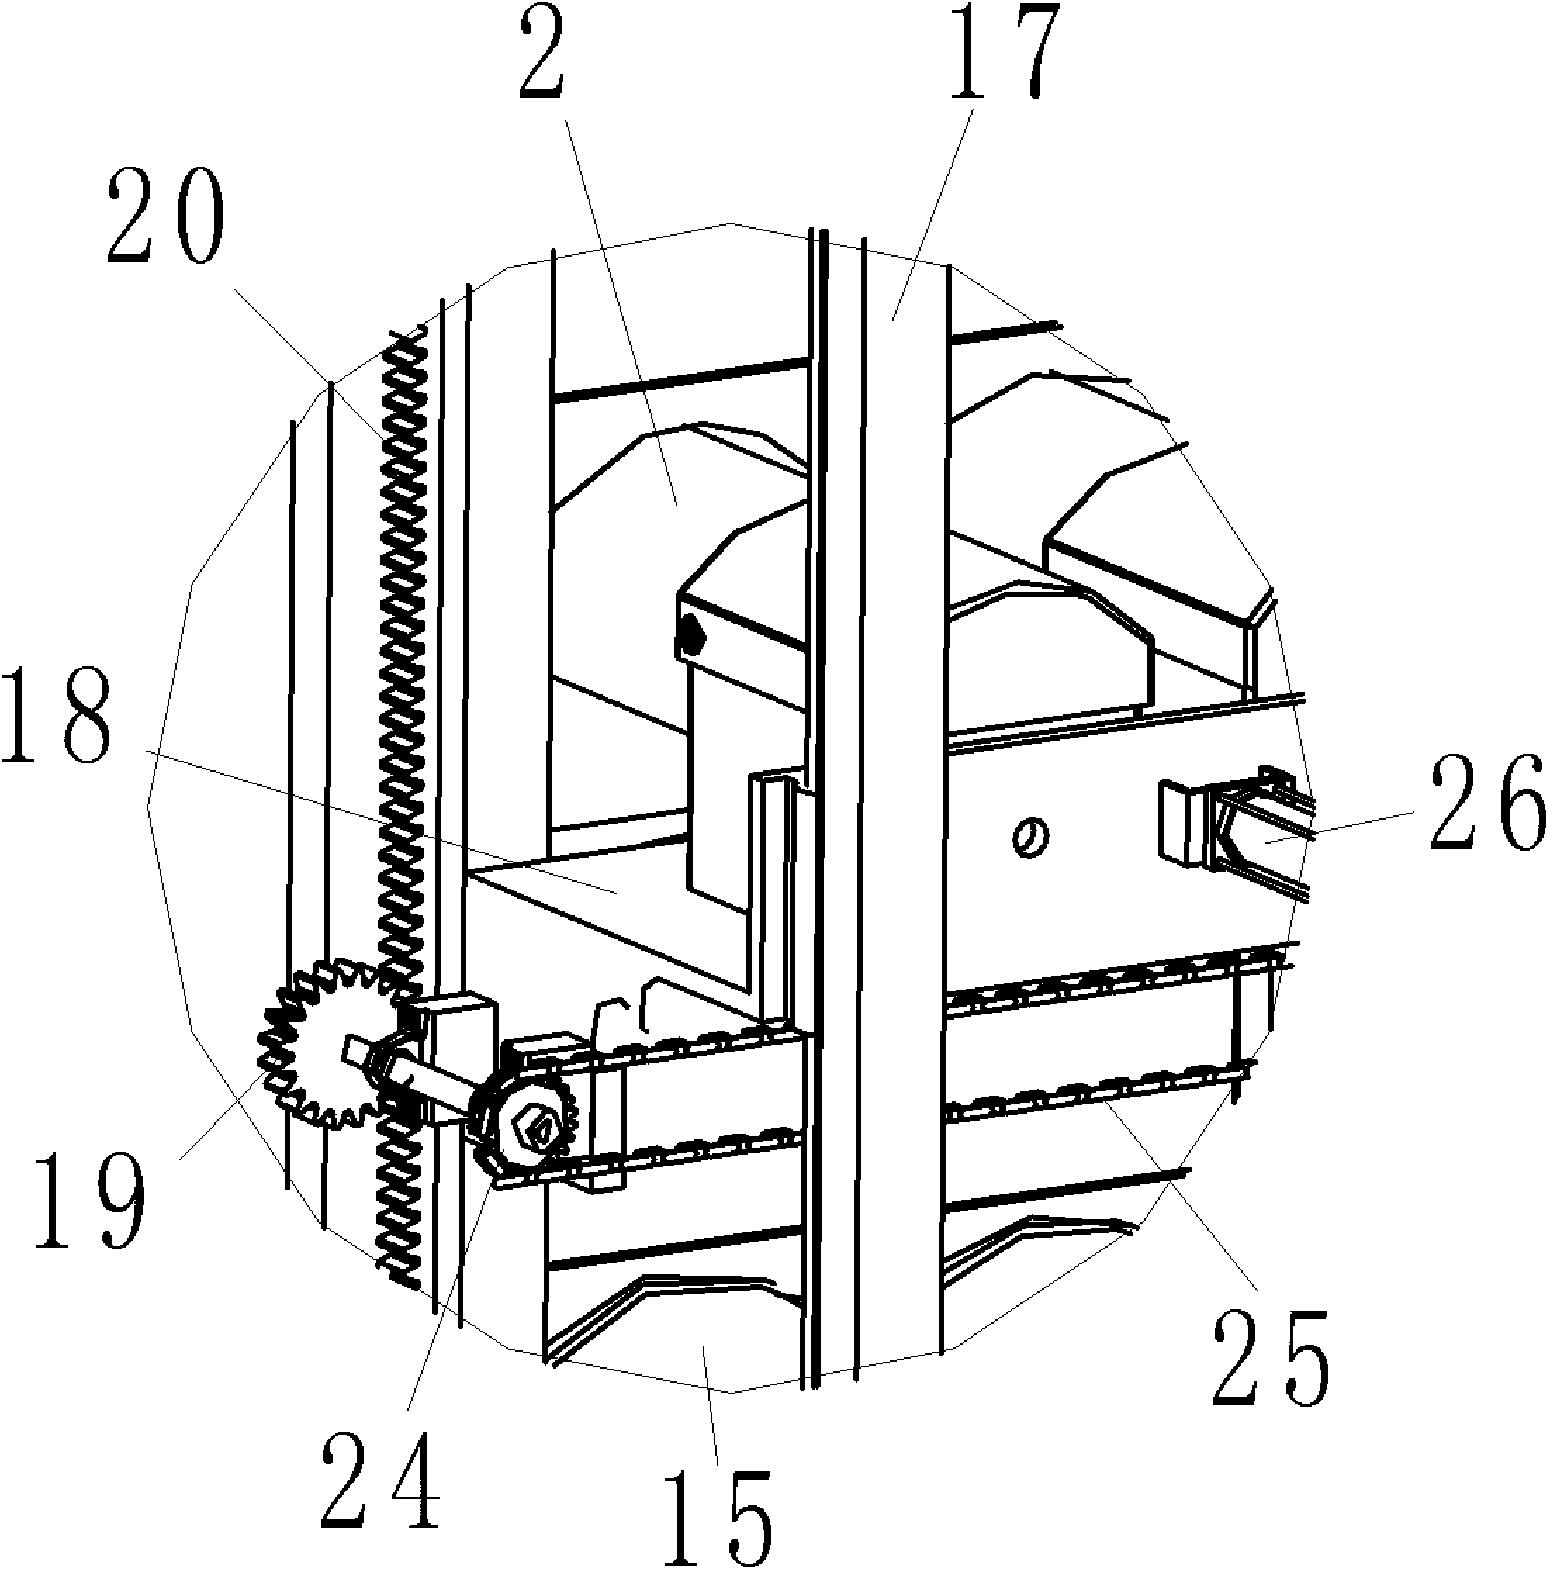 Method and device for generating power by utilizing waste gas of matrix-type charcoal kiln